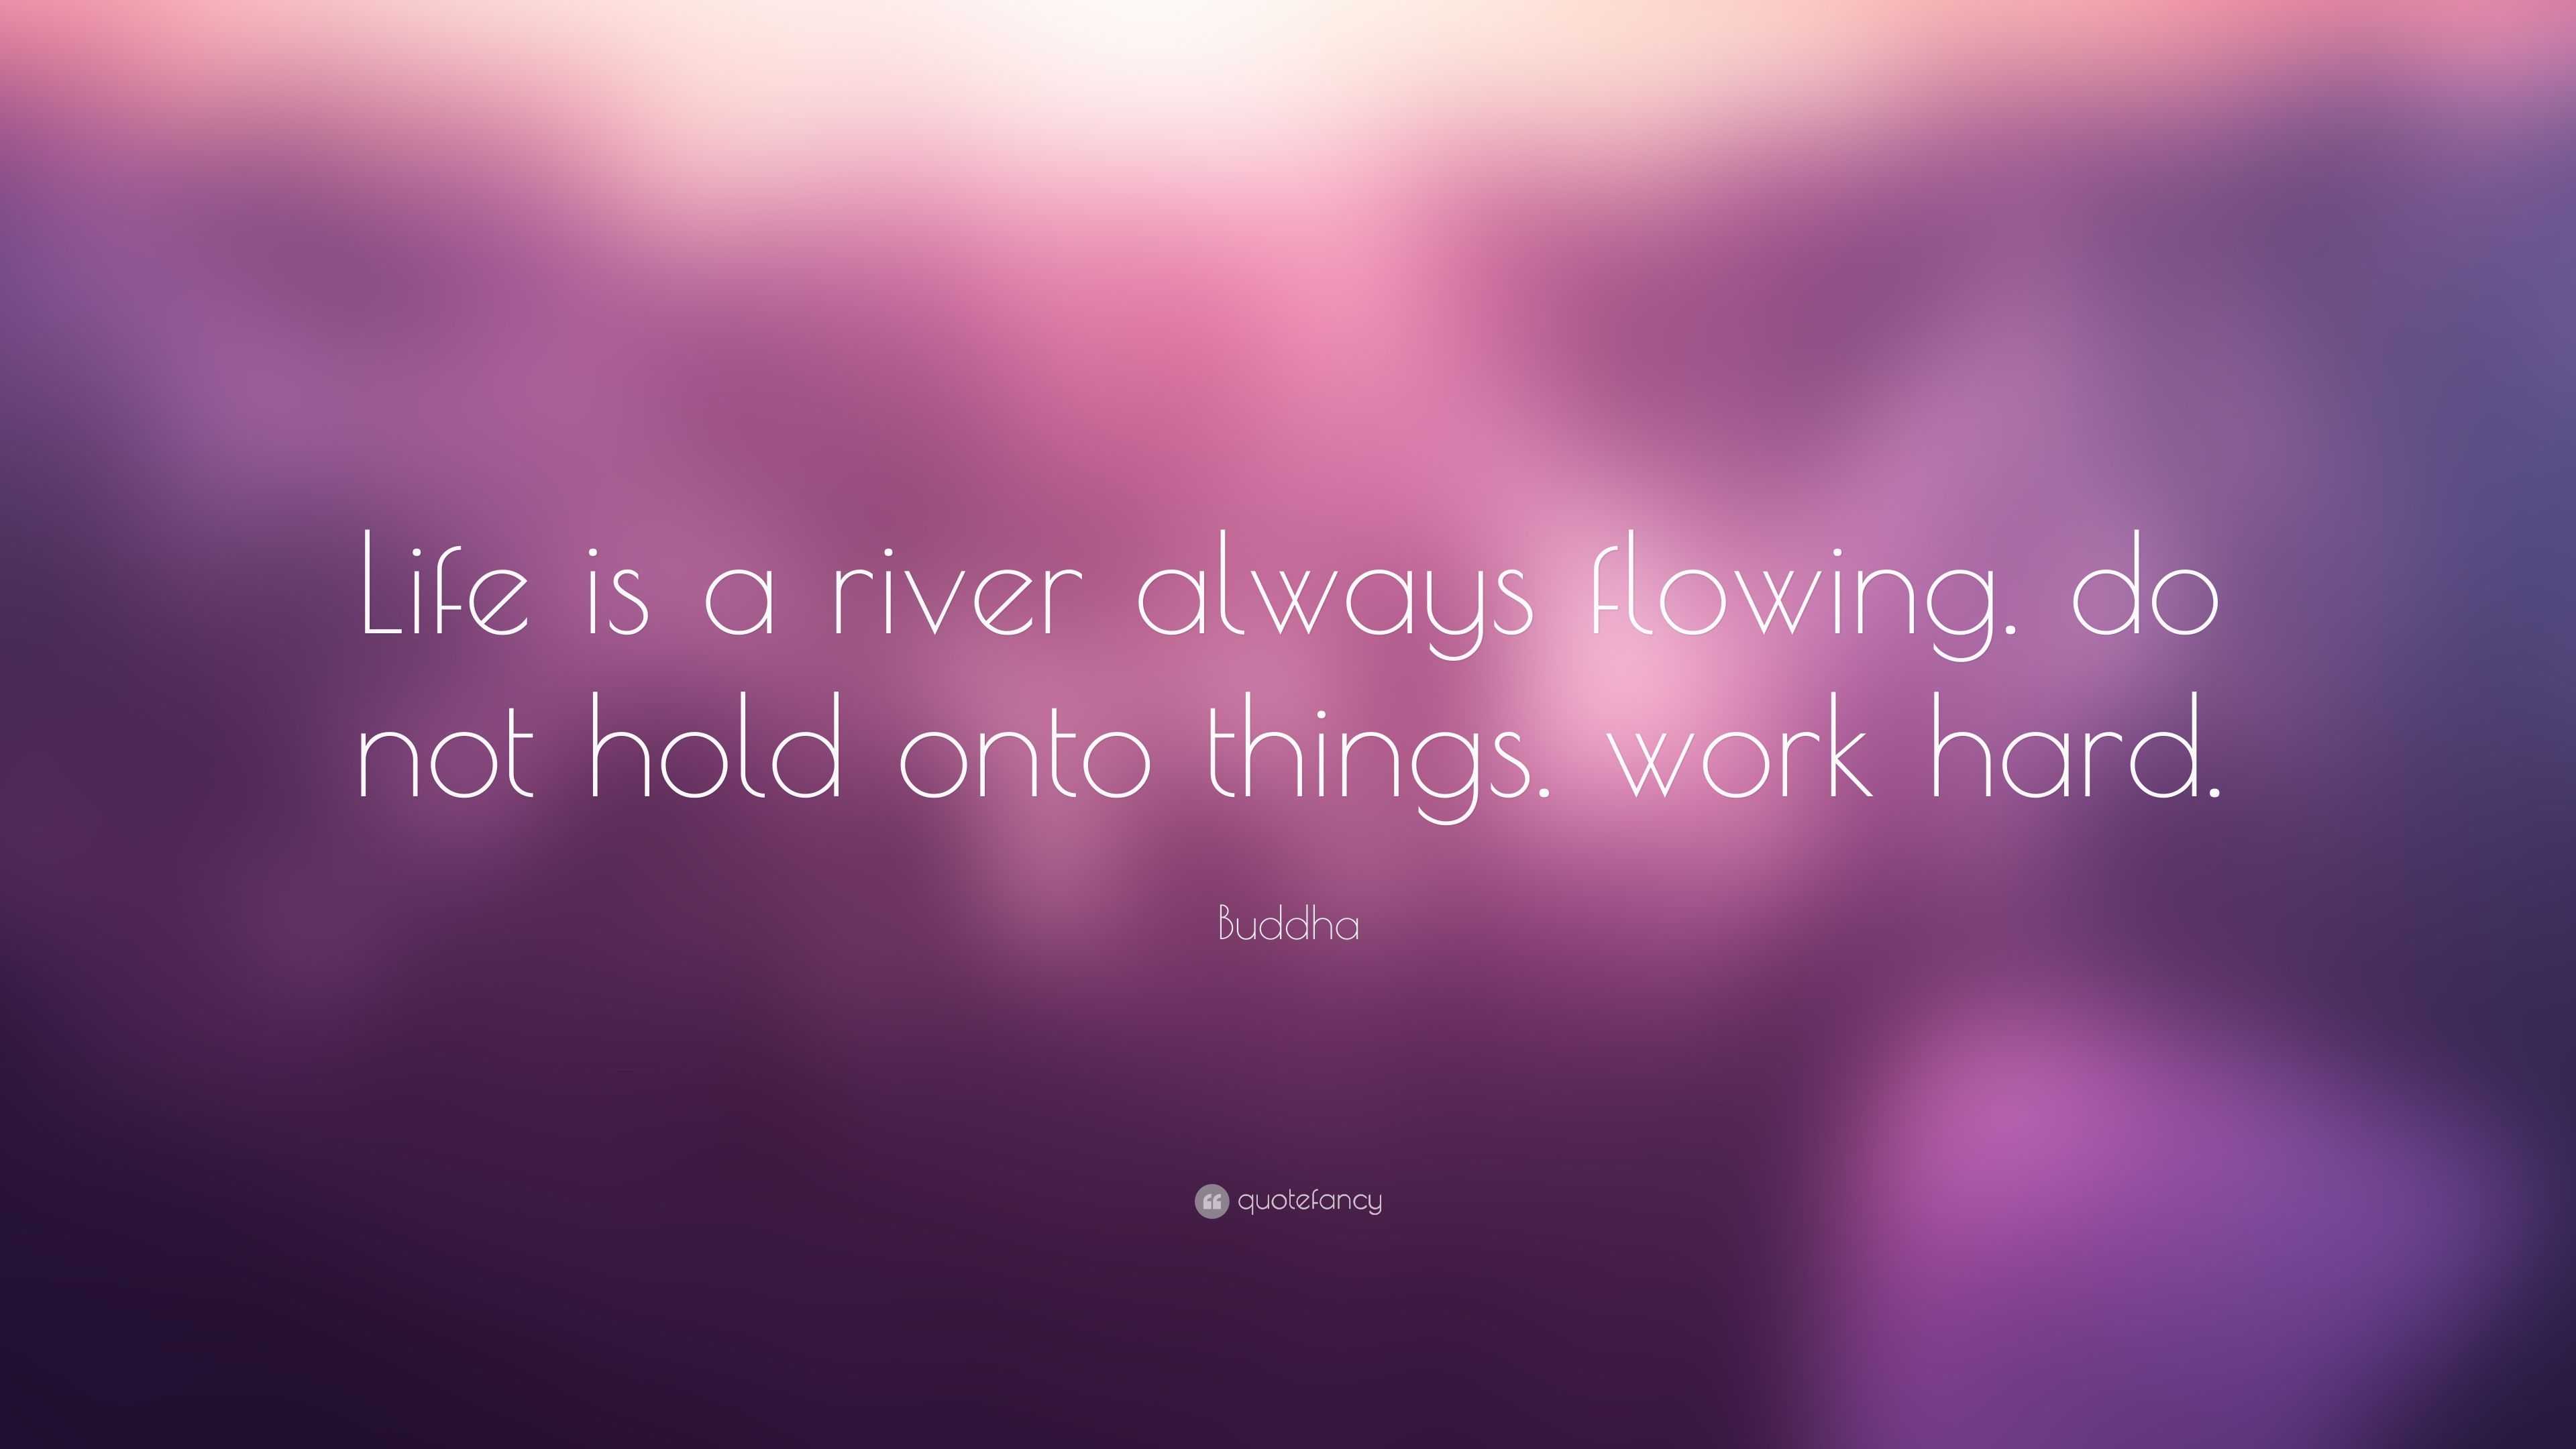 Buddha Quote “Life is a river always flowing do not hold onto things